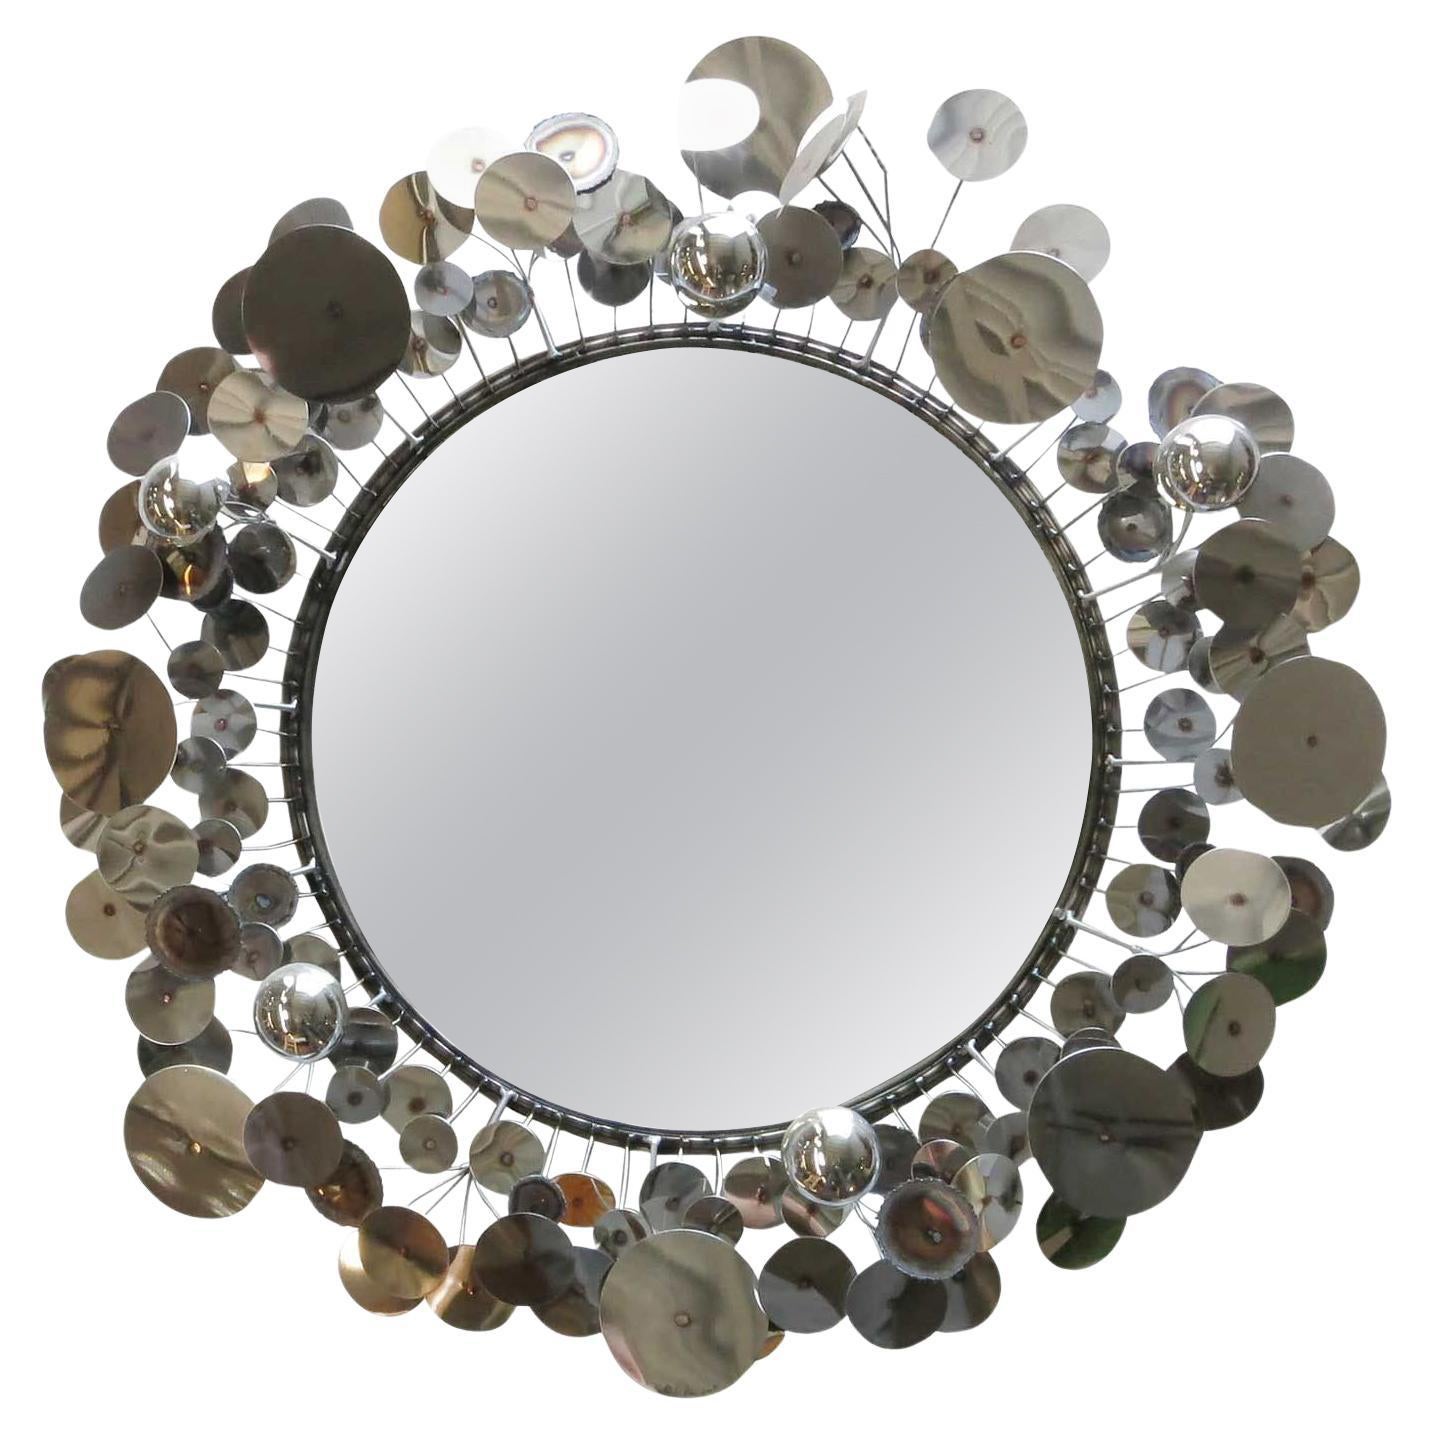 Curtis Jere "Raindrops" Sculptural Wall Mirror For Sale